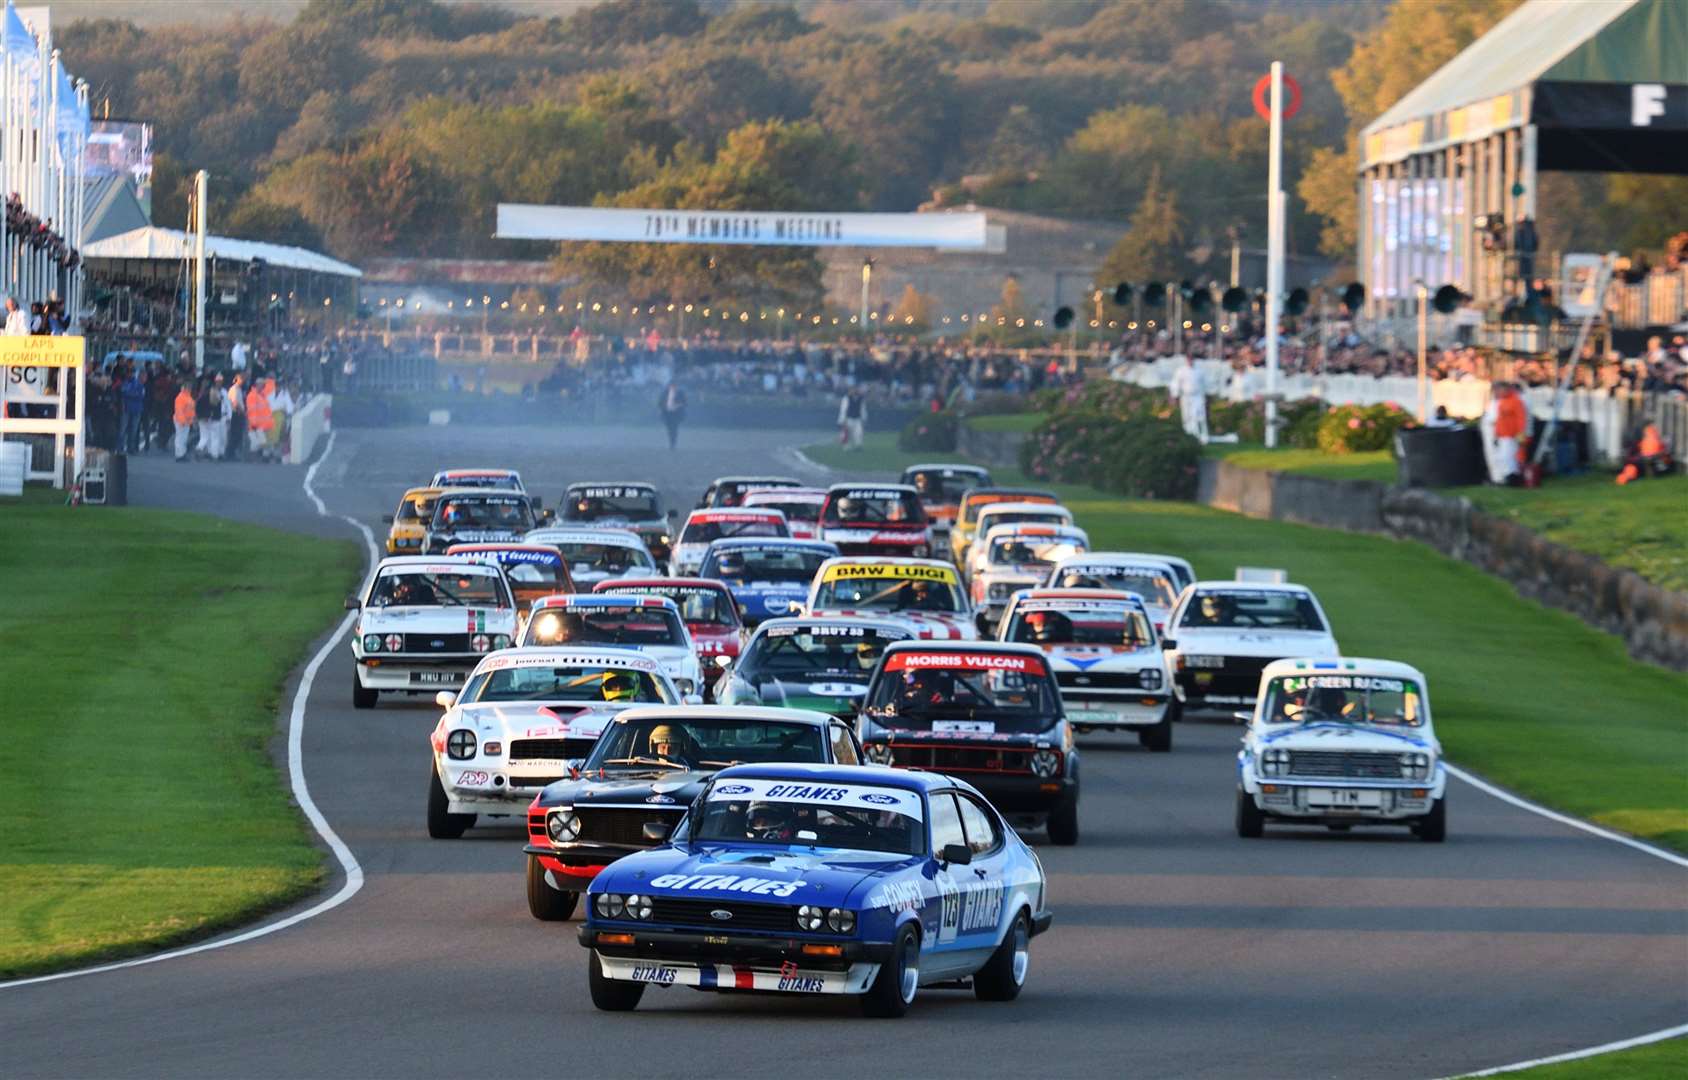 Hill leads the Gerry Marshall Trophy field at Goodwood's 78th Members' Meeting